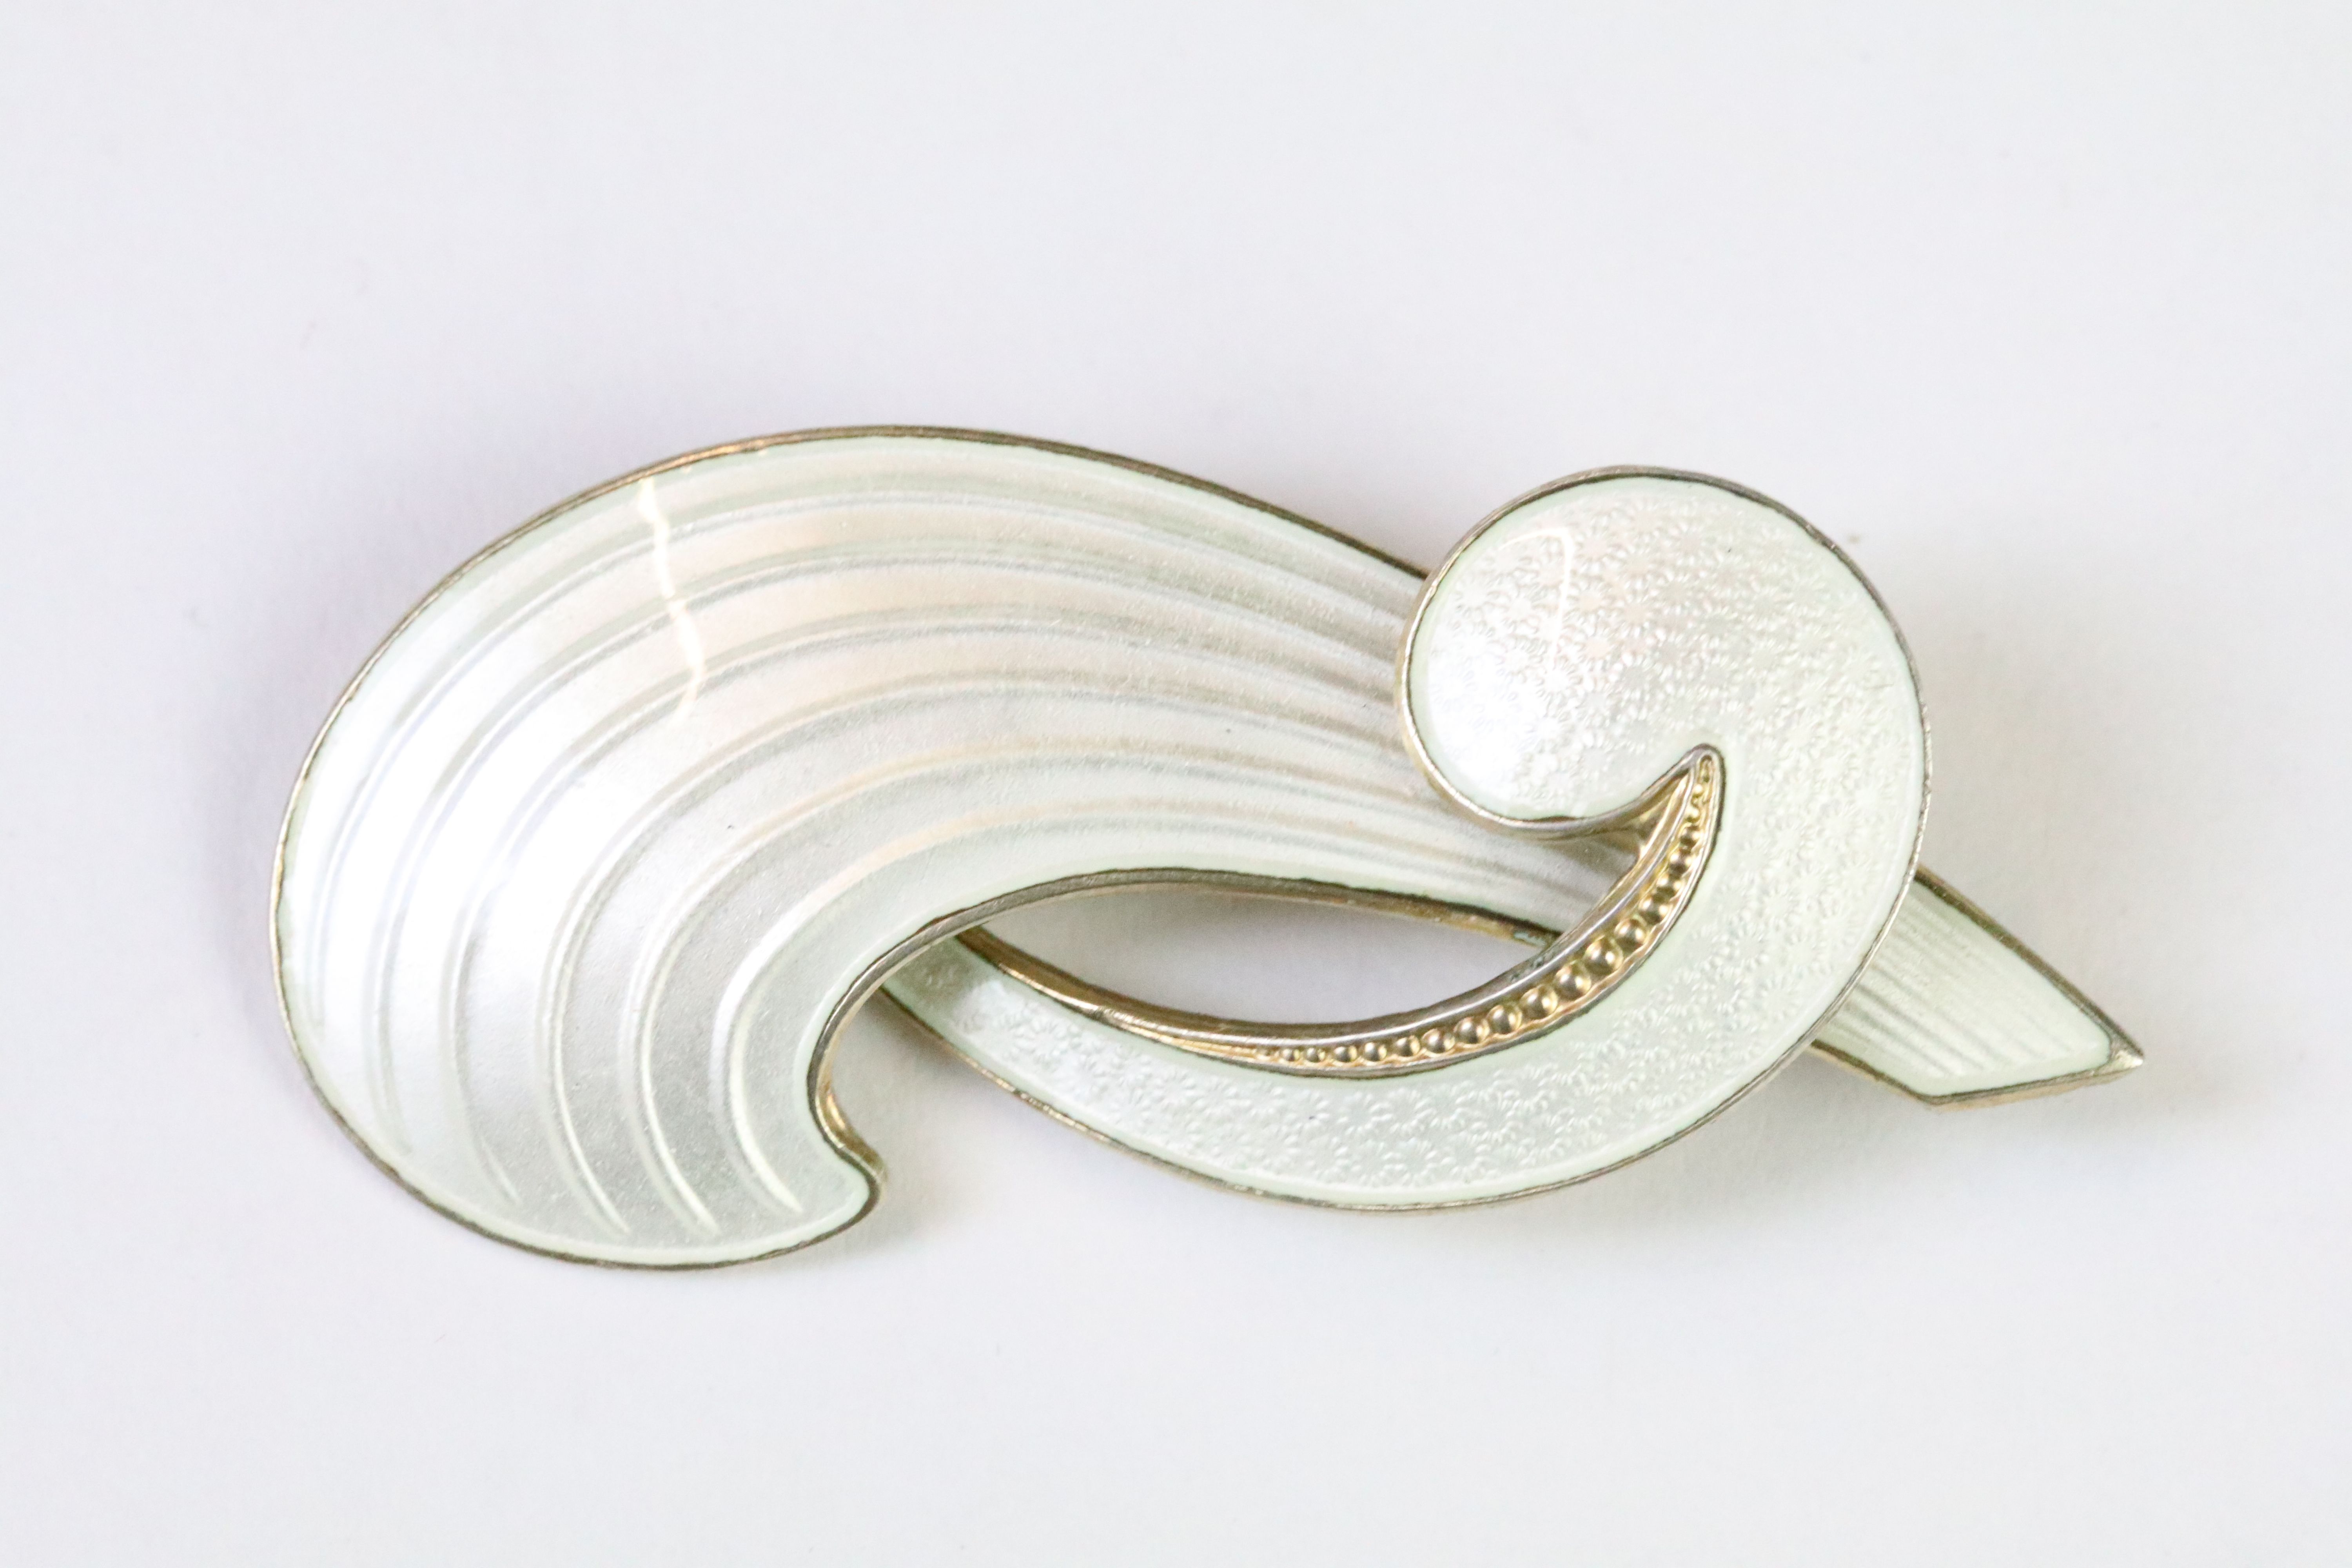 A mid 20th century Norwegian sterling silver and white enamel brooch by Albert Scharning, marked